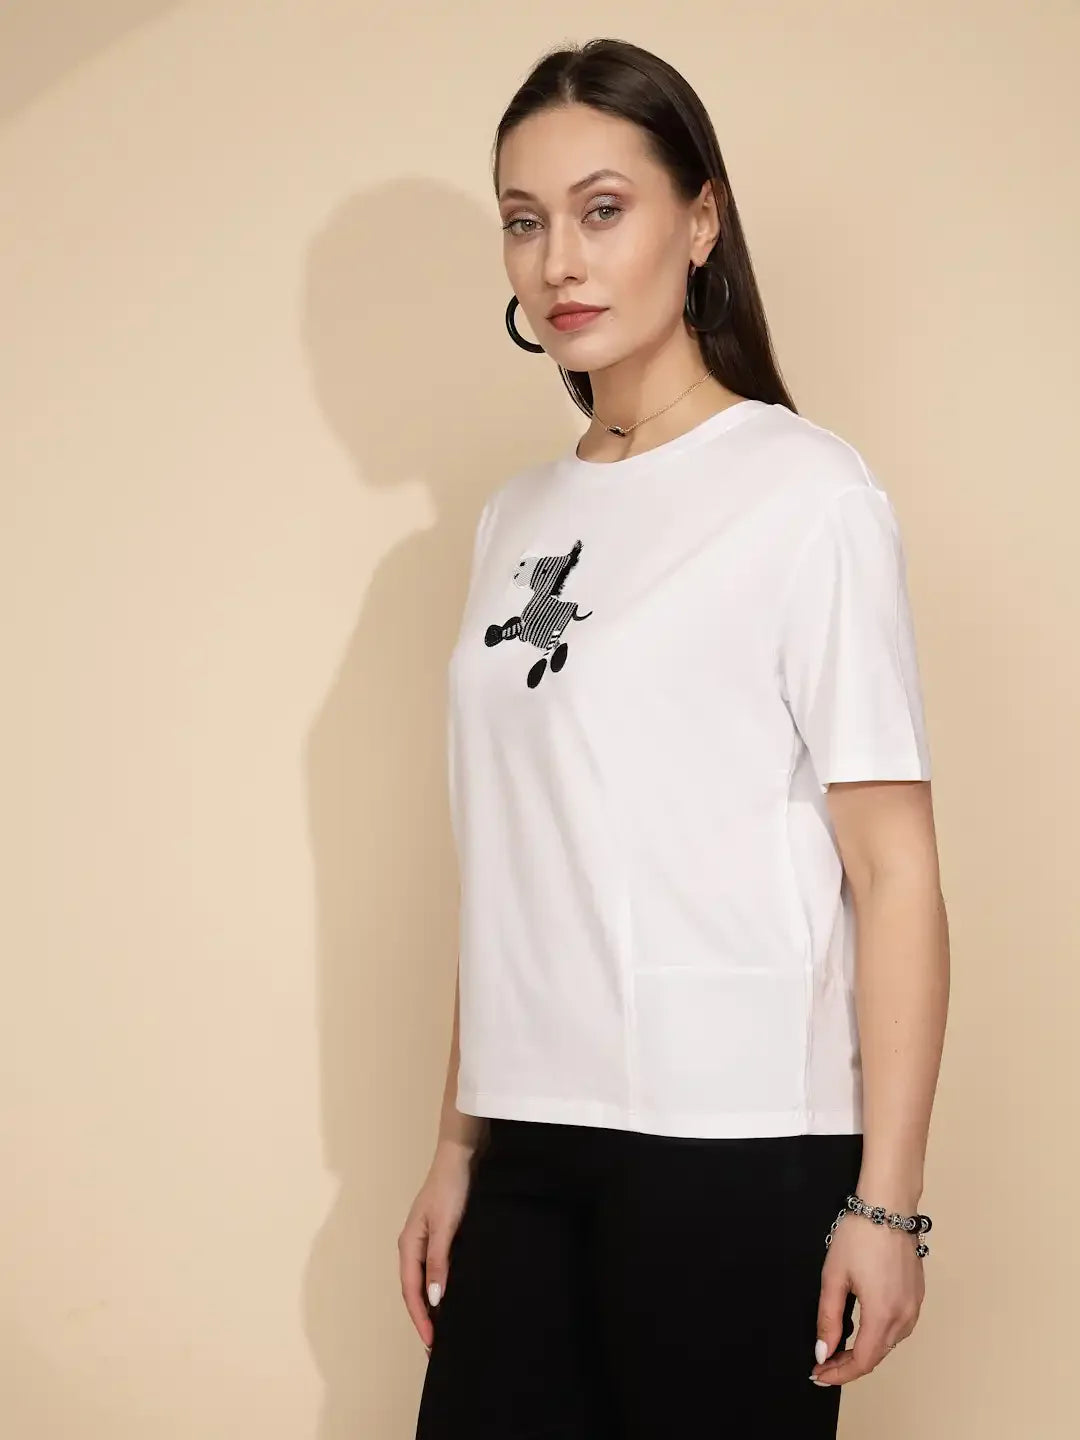 White Cotton Regular Fit Top For Women - Global Republic #